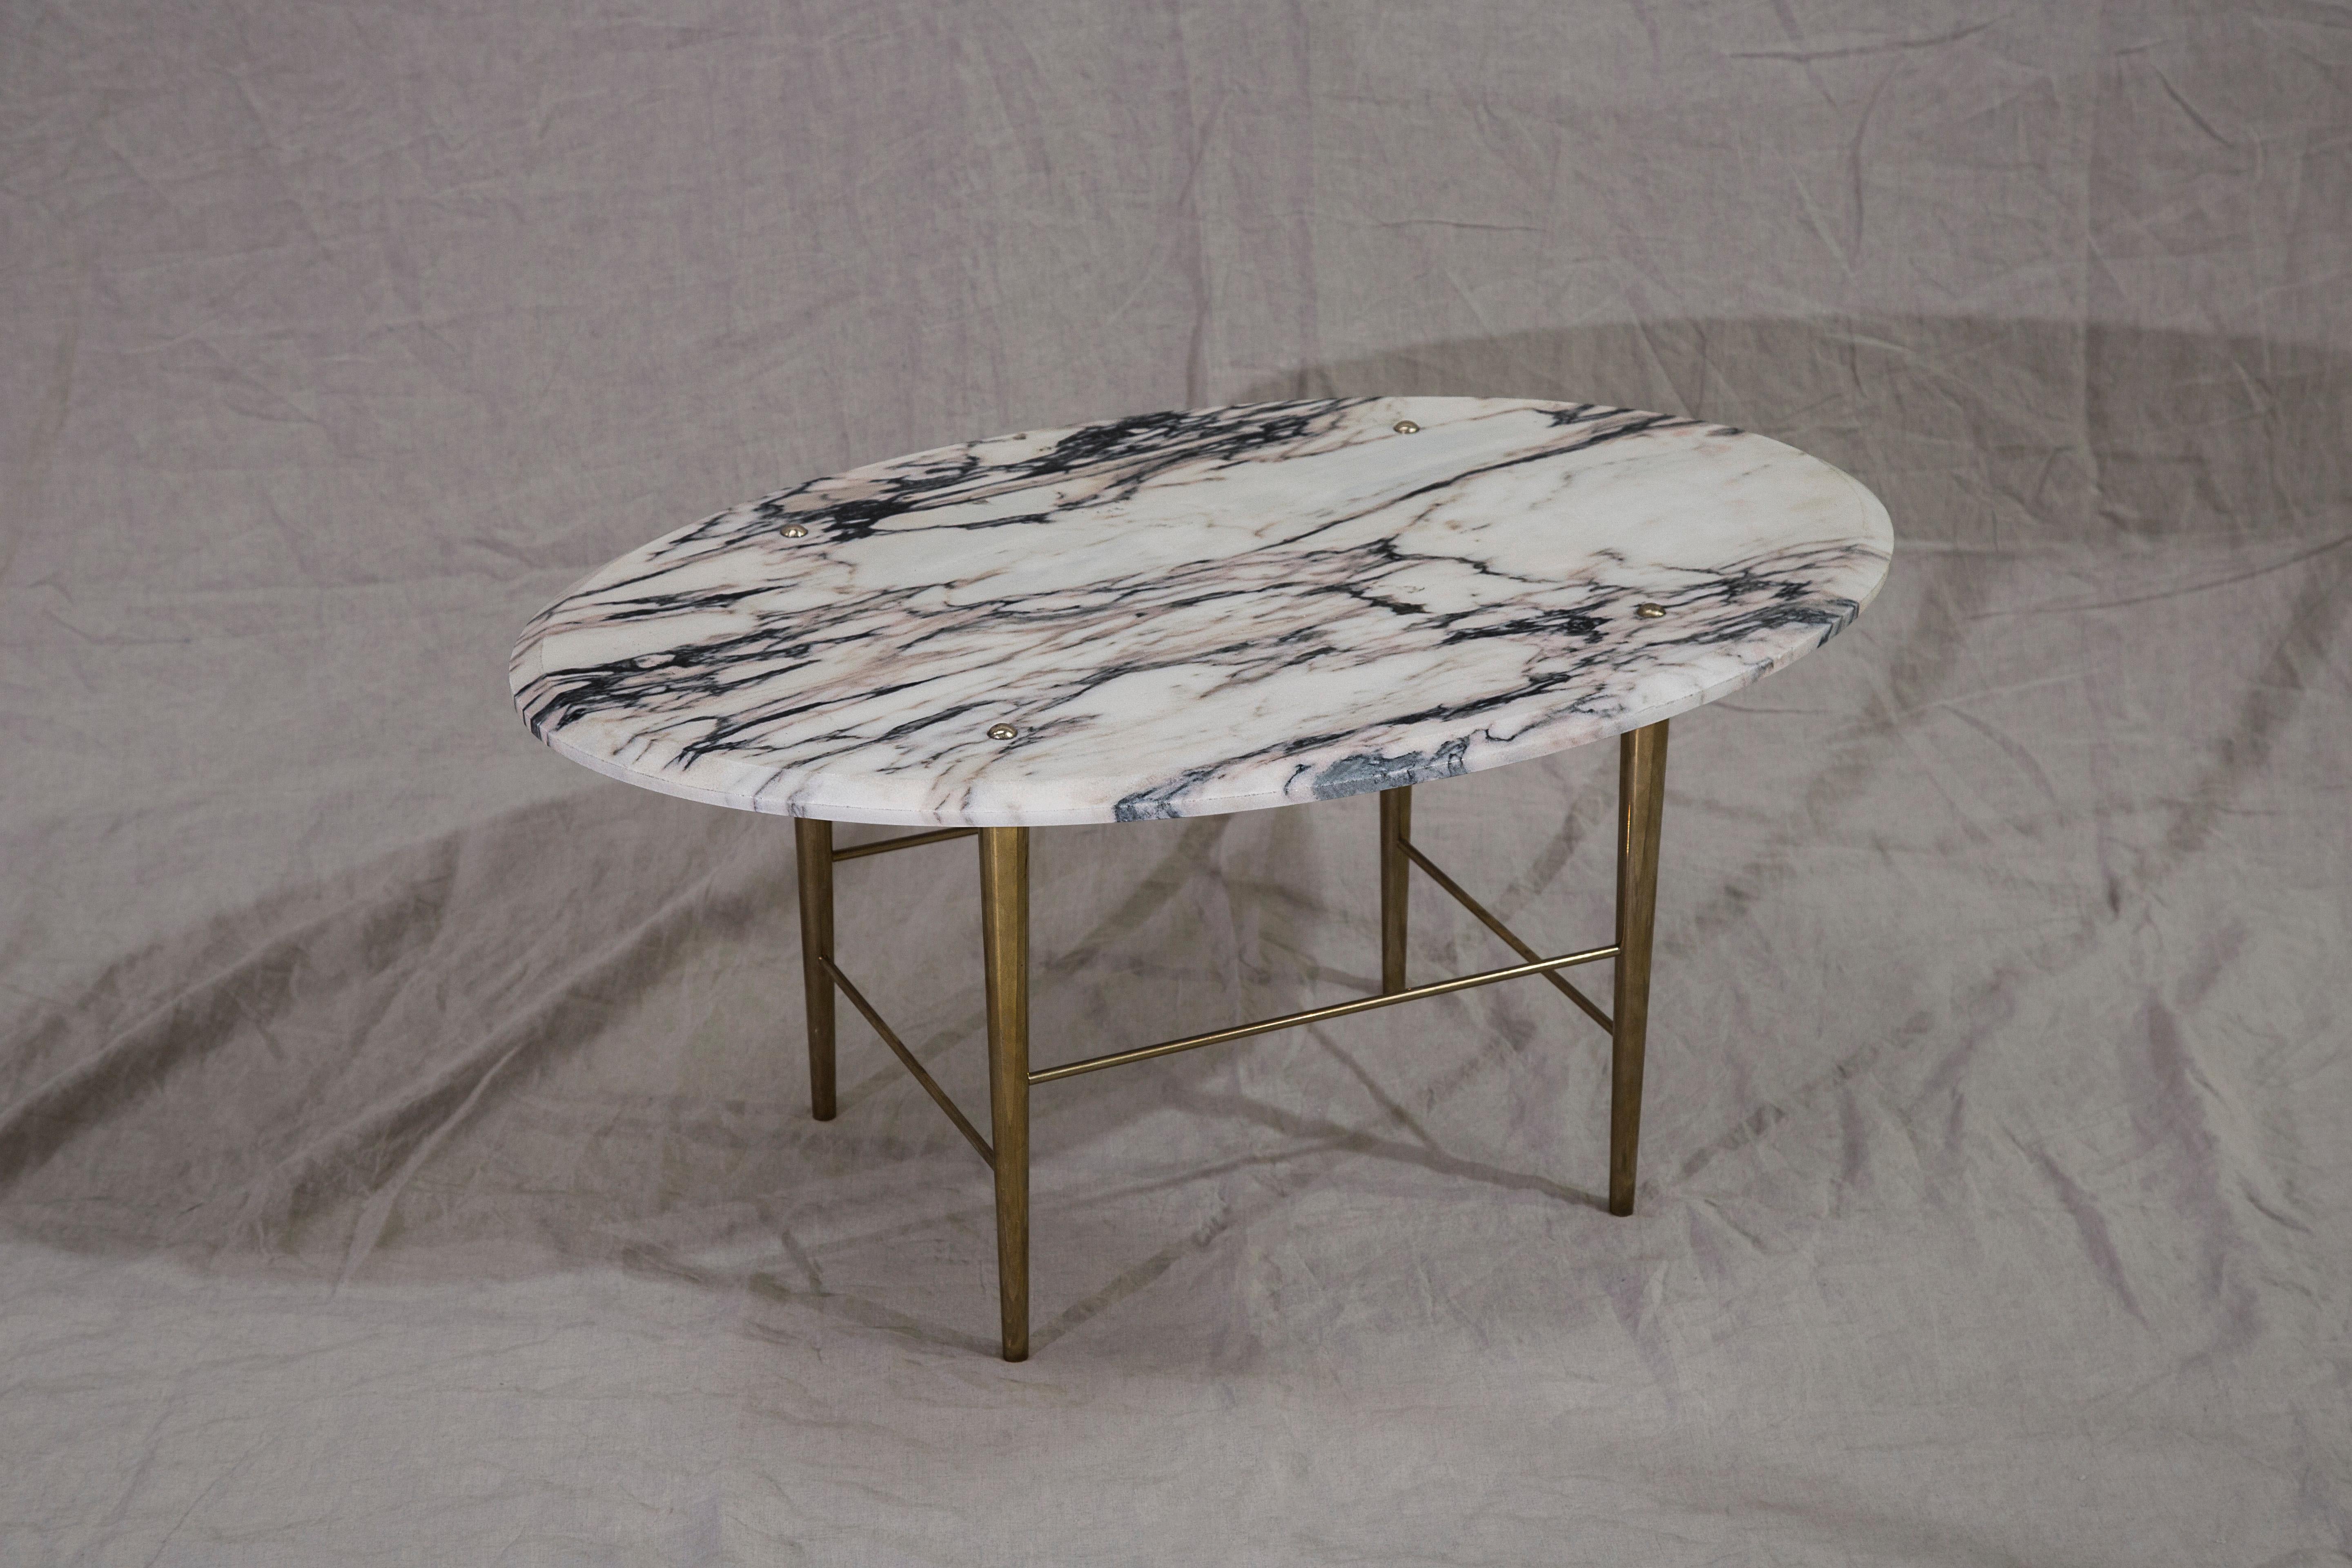 A coffee table in Portuguese marble and polished brass. handcrafted to order in Northern England.

Measures: 1200 mm (L) x 760 mm (W) x 400 mm (H)

Bespoke sizes and finishes available.